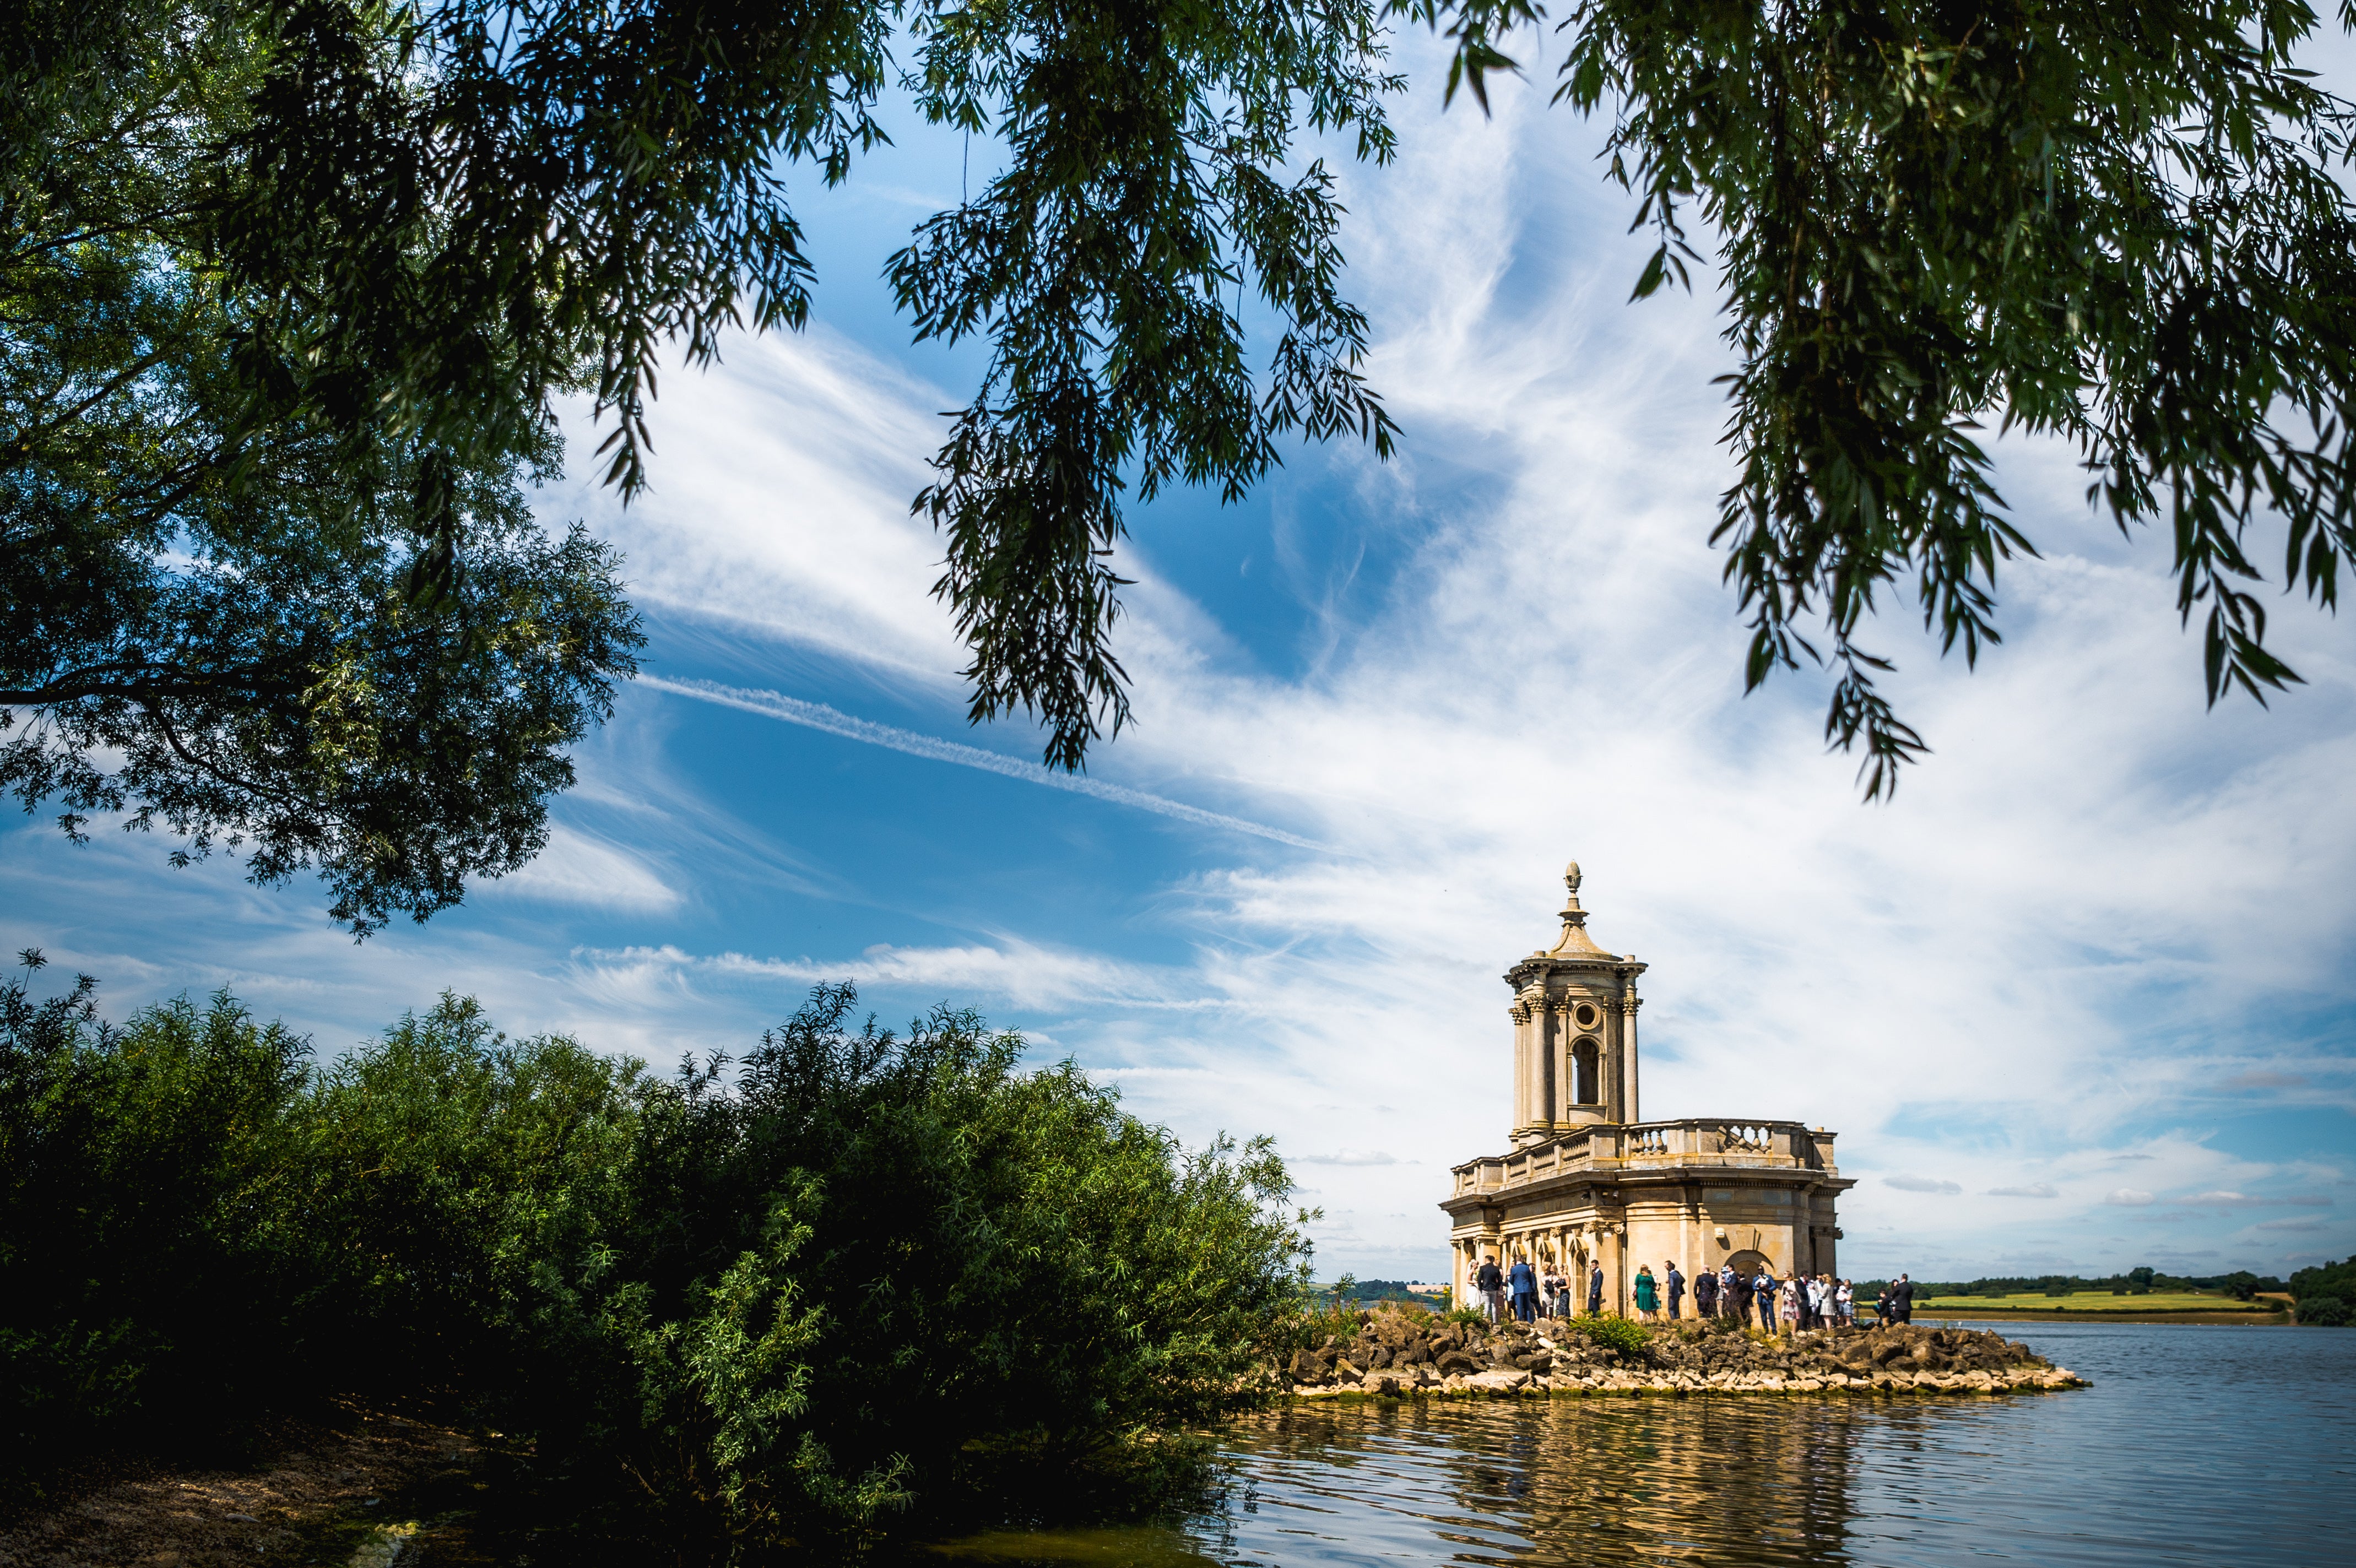 Getting married at Normanton Church in Rutland Water